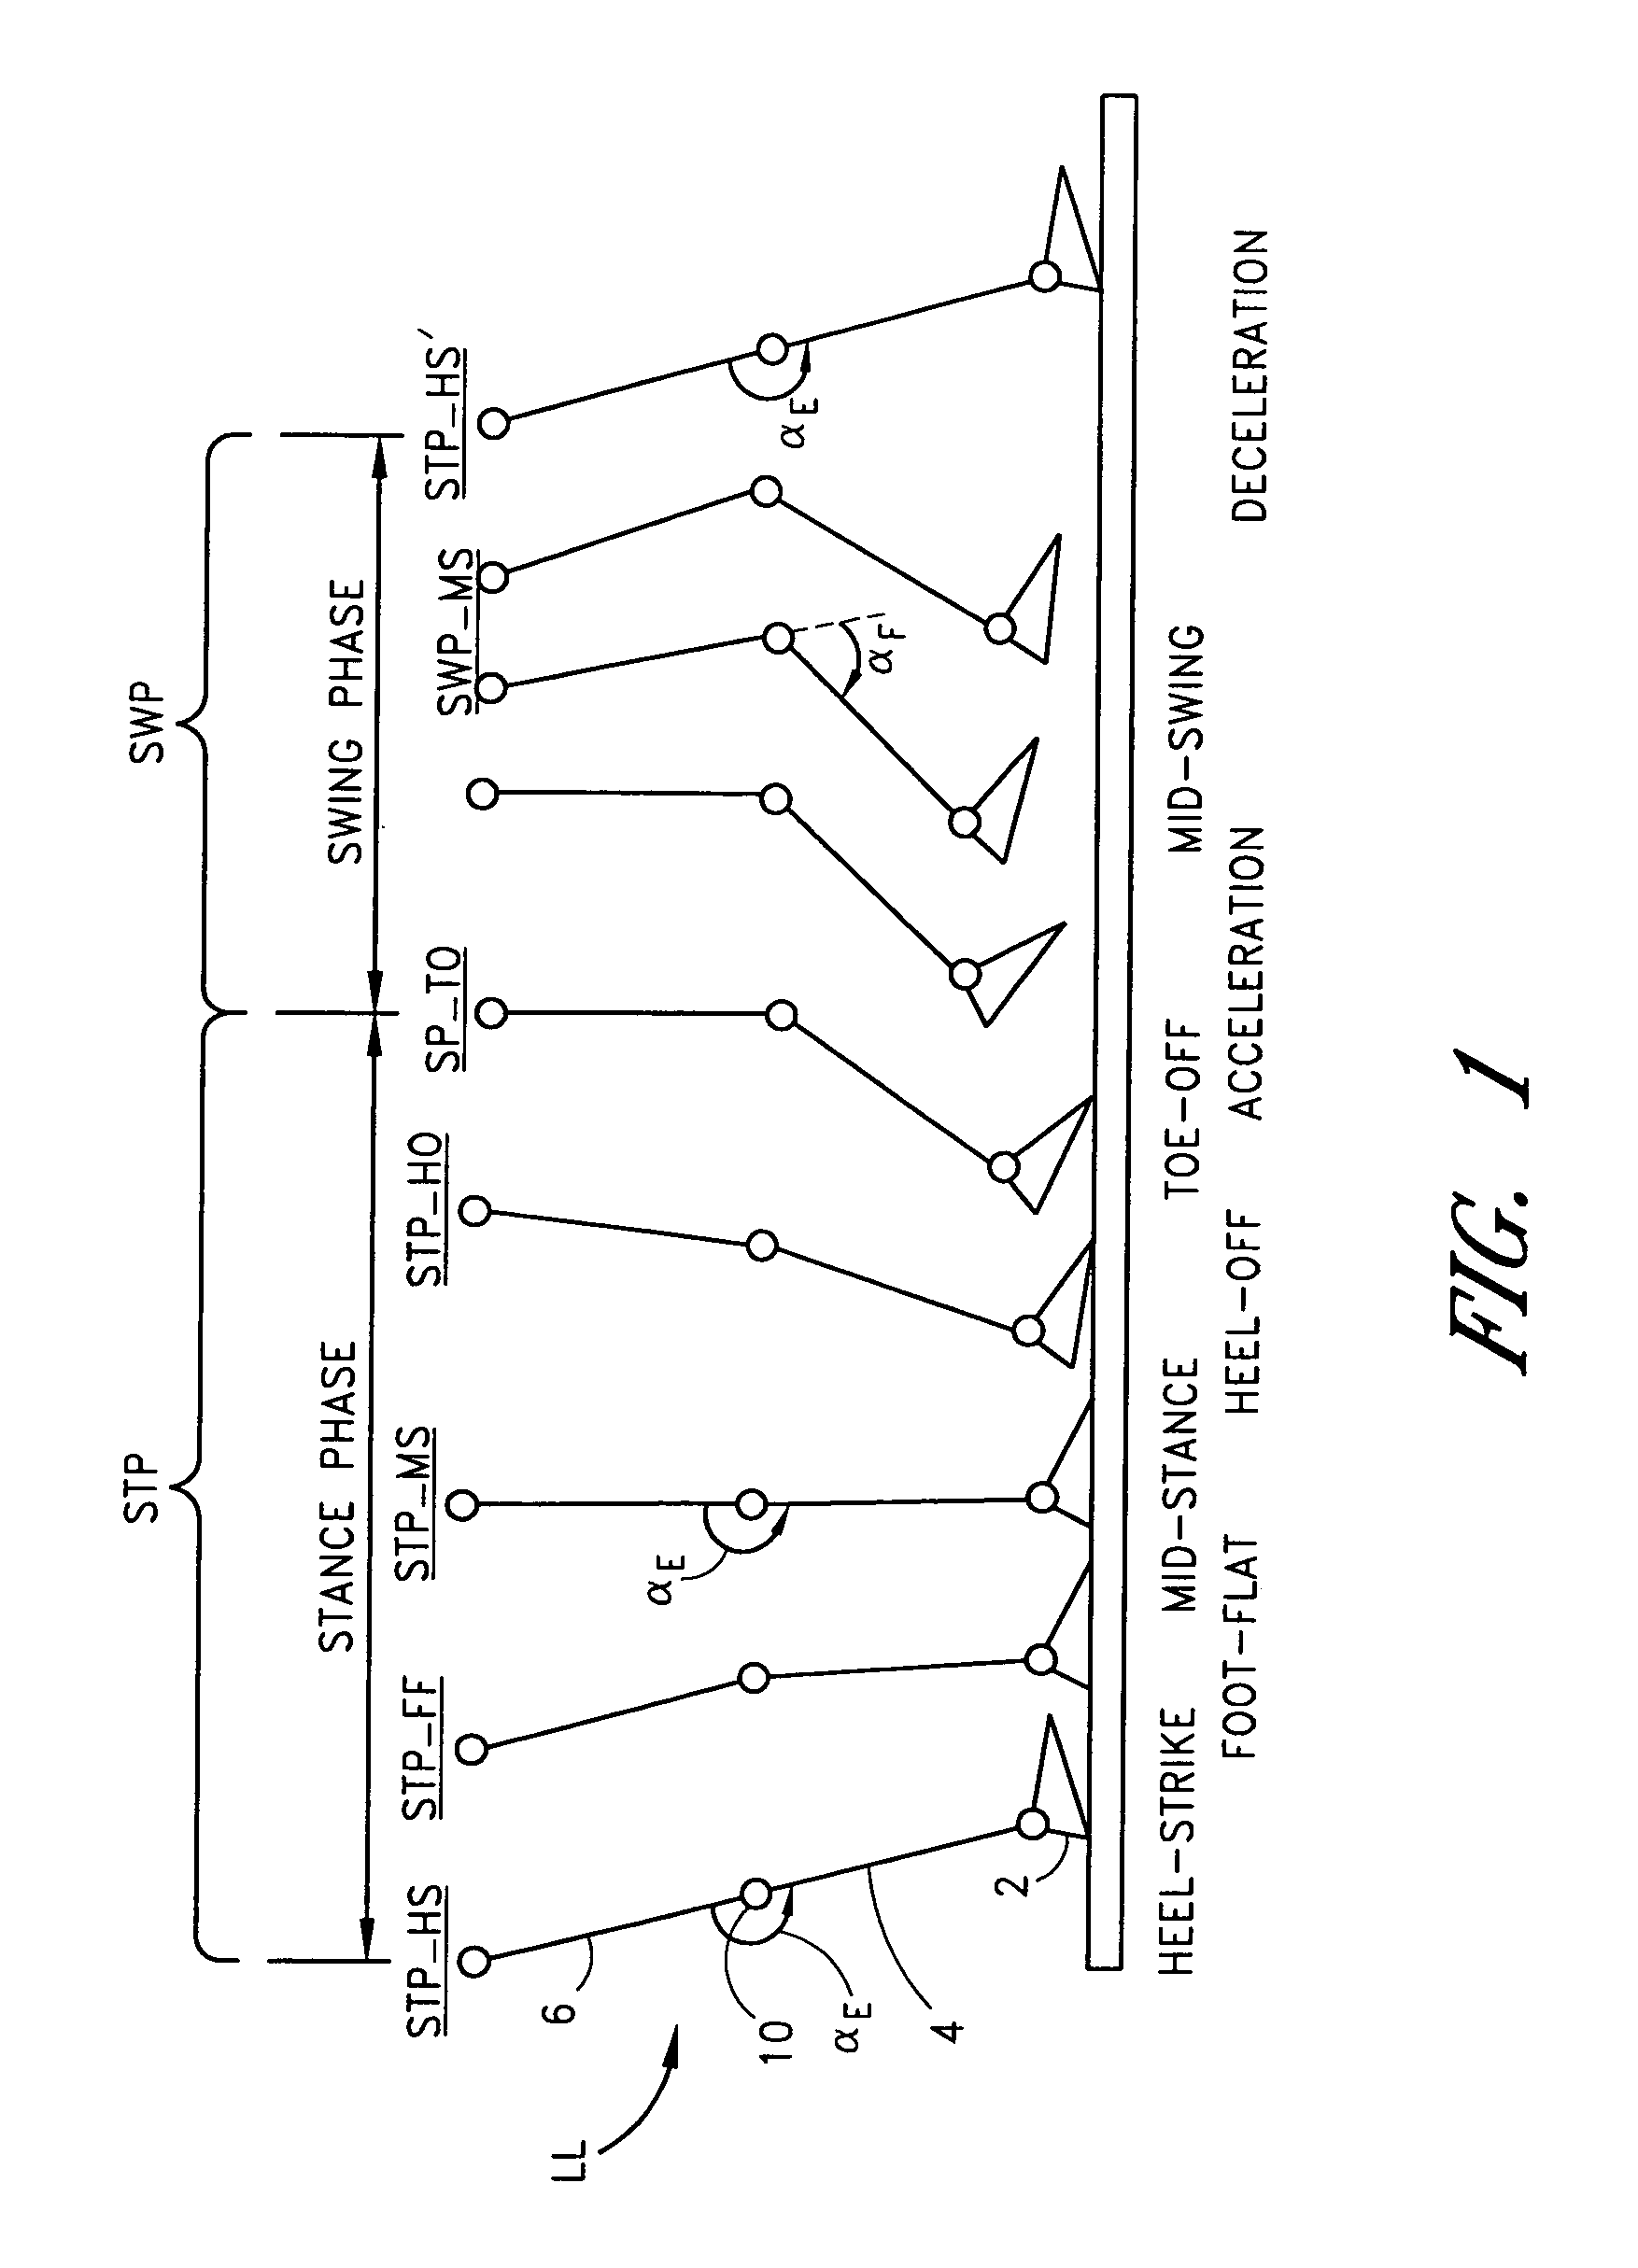 Systems and methods of loading fluid in a prosthetic knee